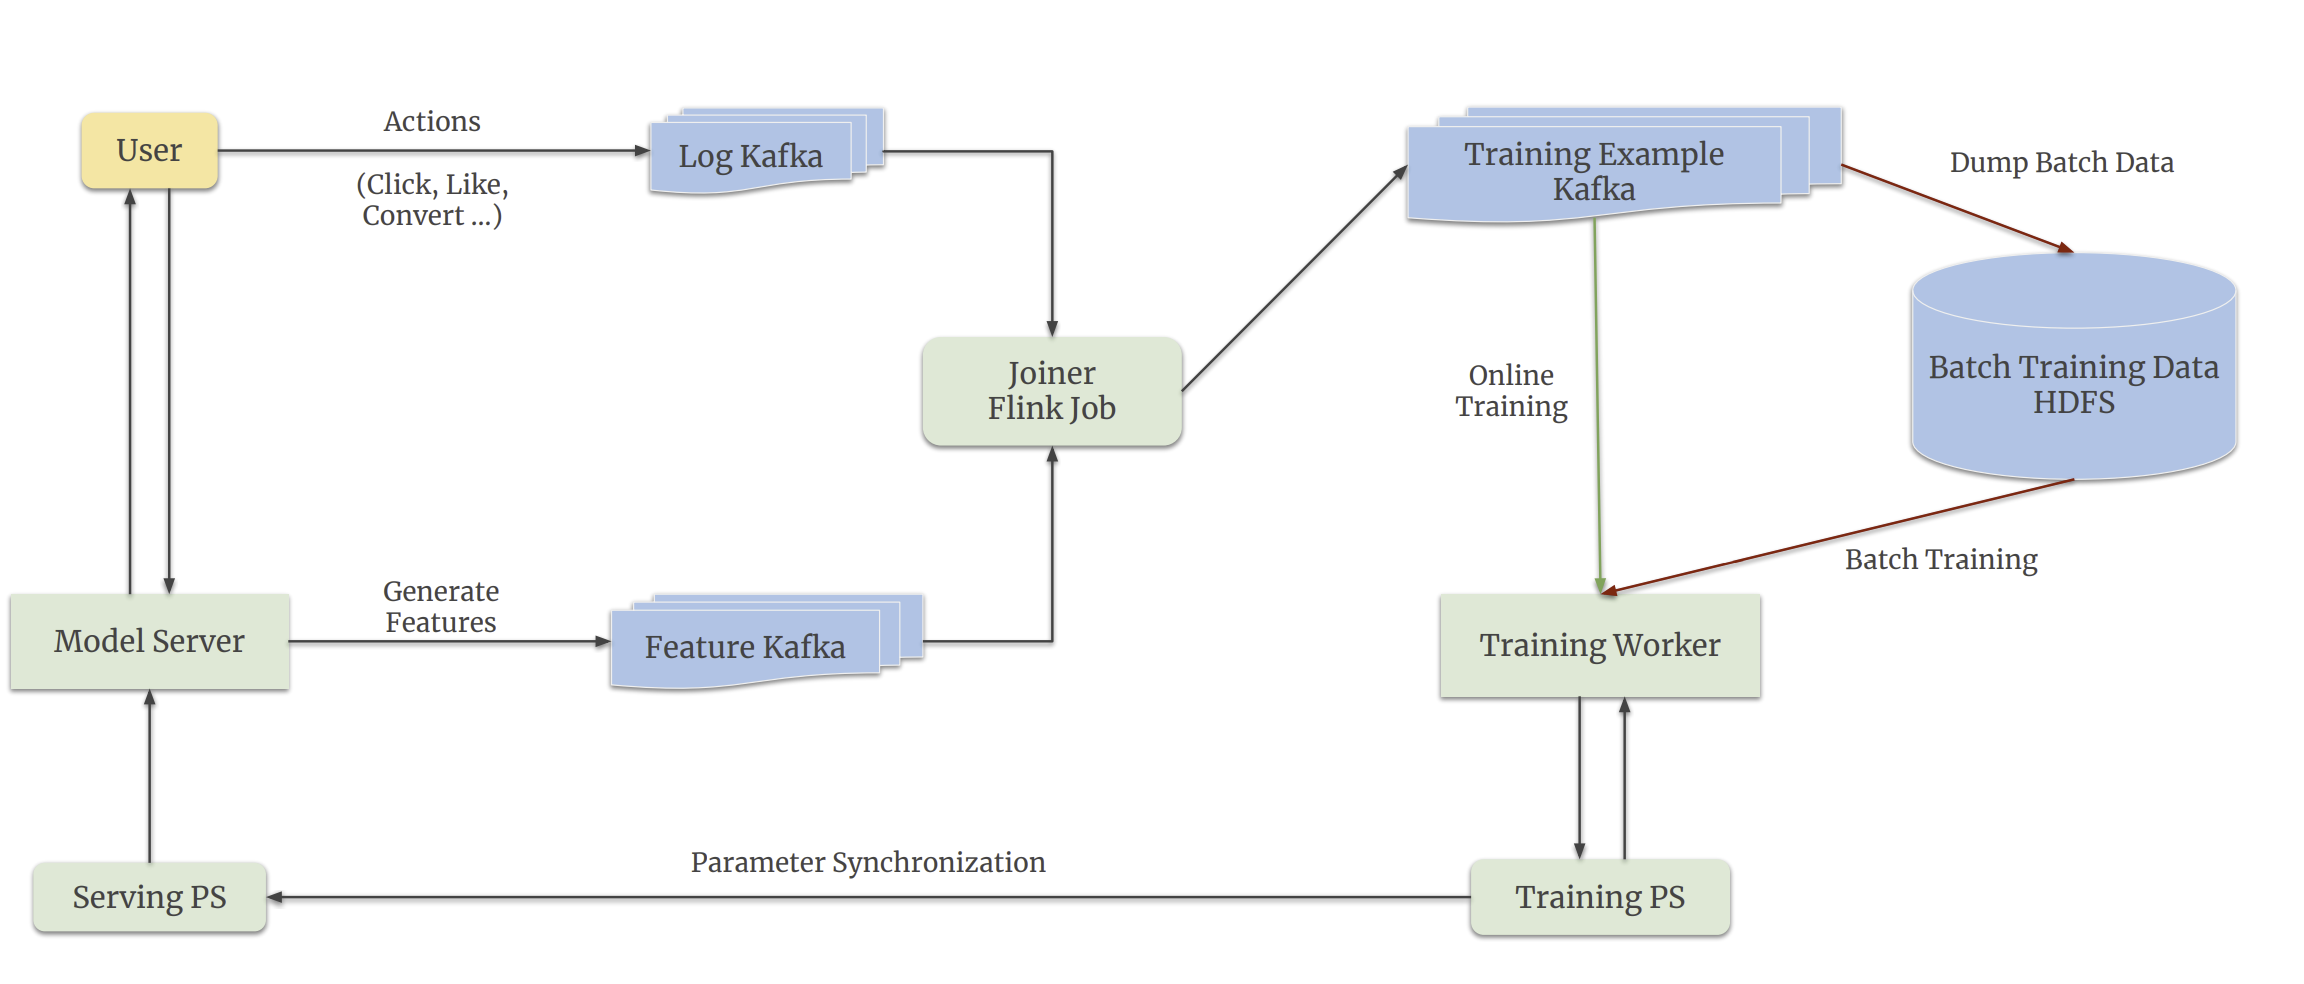 Hình 4: Streaming Engine. The information feedback loop from [User → Model Server → Training Worker → Model Server → User] would spend a long time when taking the Batch Training path, while the Online Training will close the loop more instantly - Hình ảnh được cắt từ paper